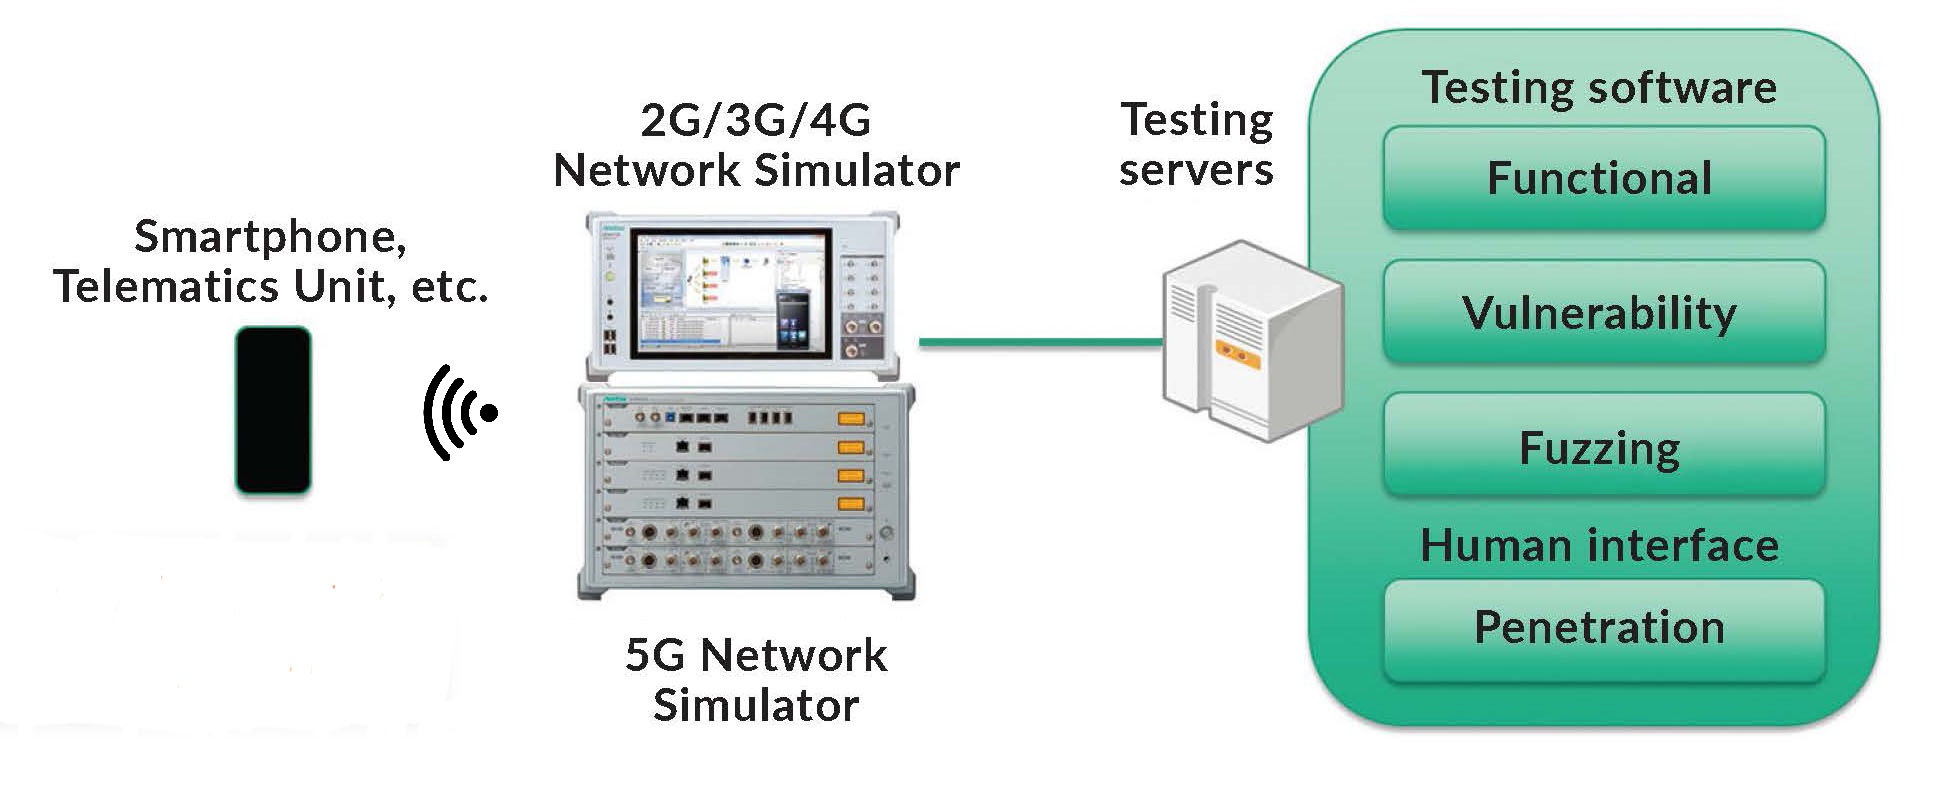 IoT devices in private 5G networks bring new verification tests